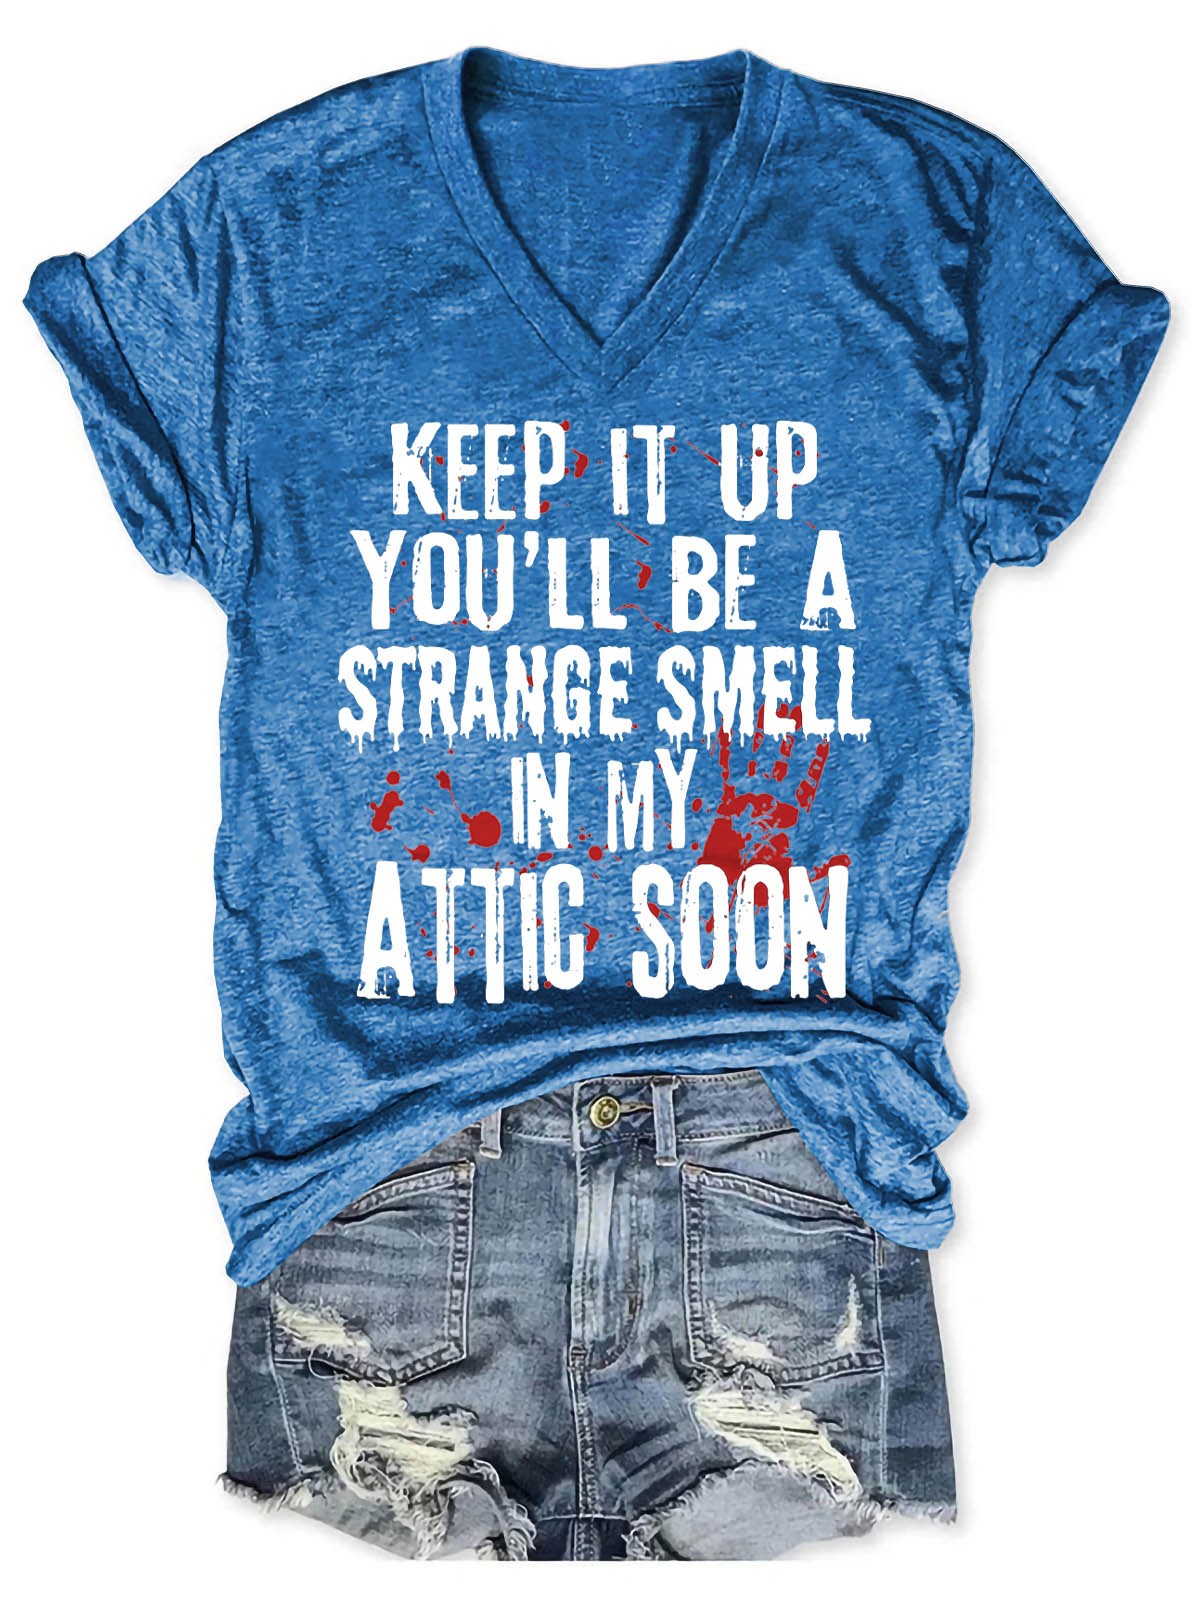 Women's Keep It Up And You'll Be A Strange Smell In The Attic Soon V-Neck T-Shirt - Outlets Forever